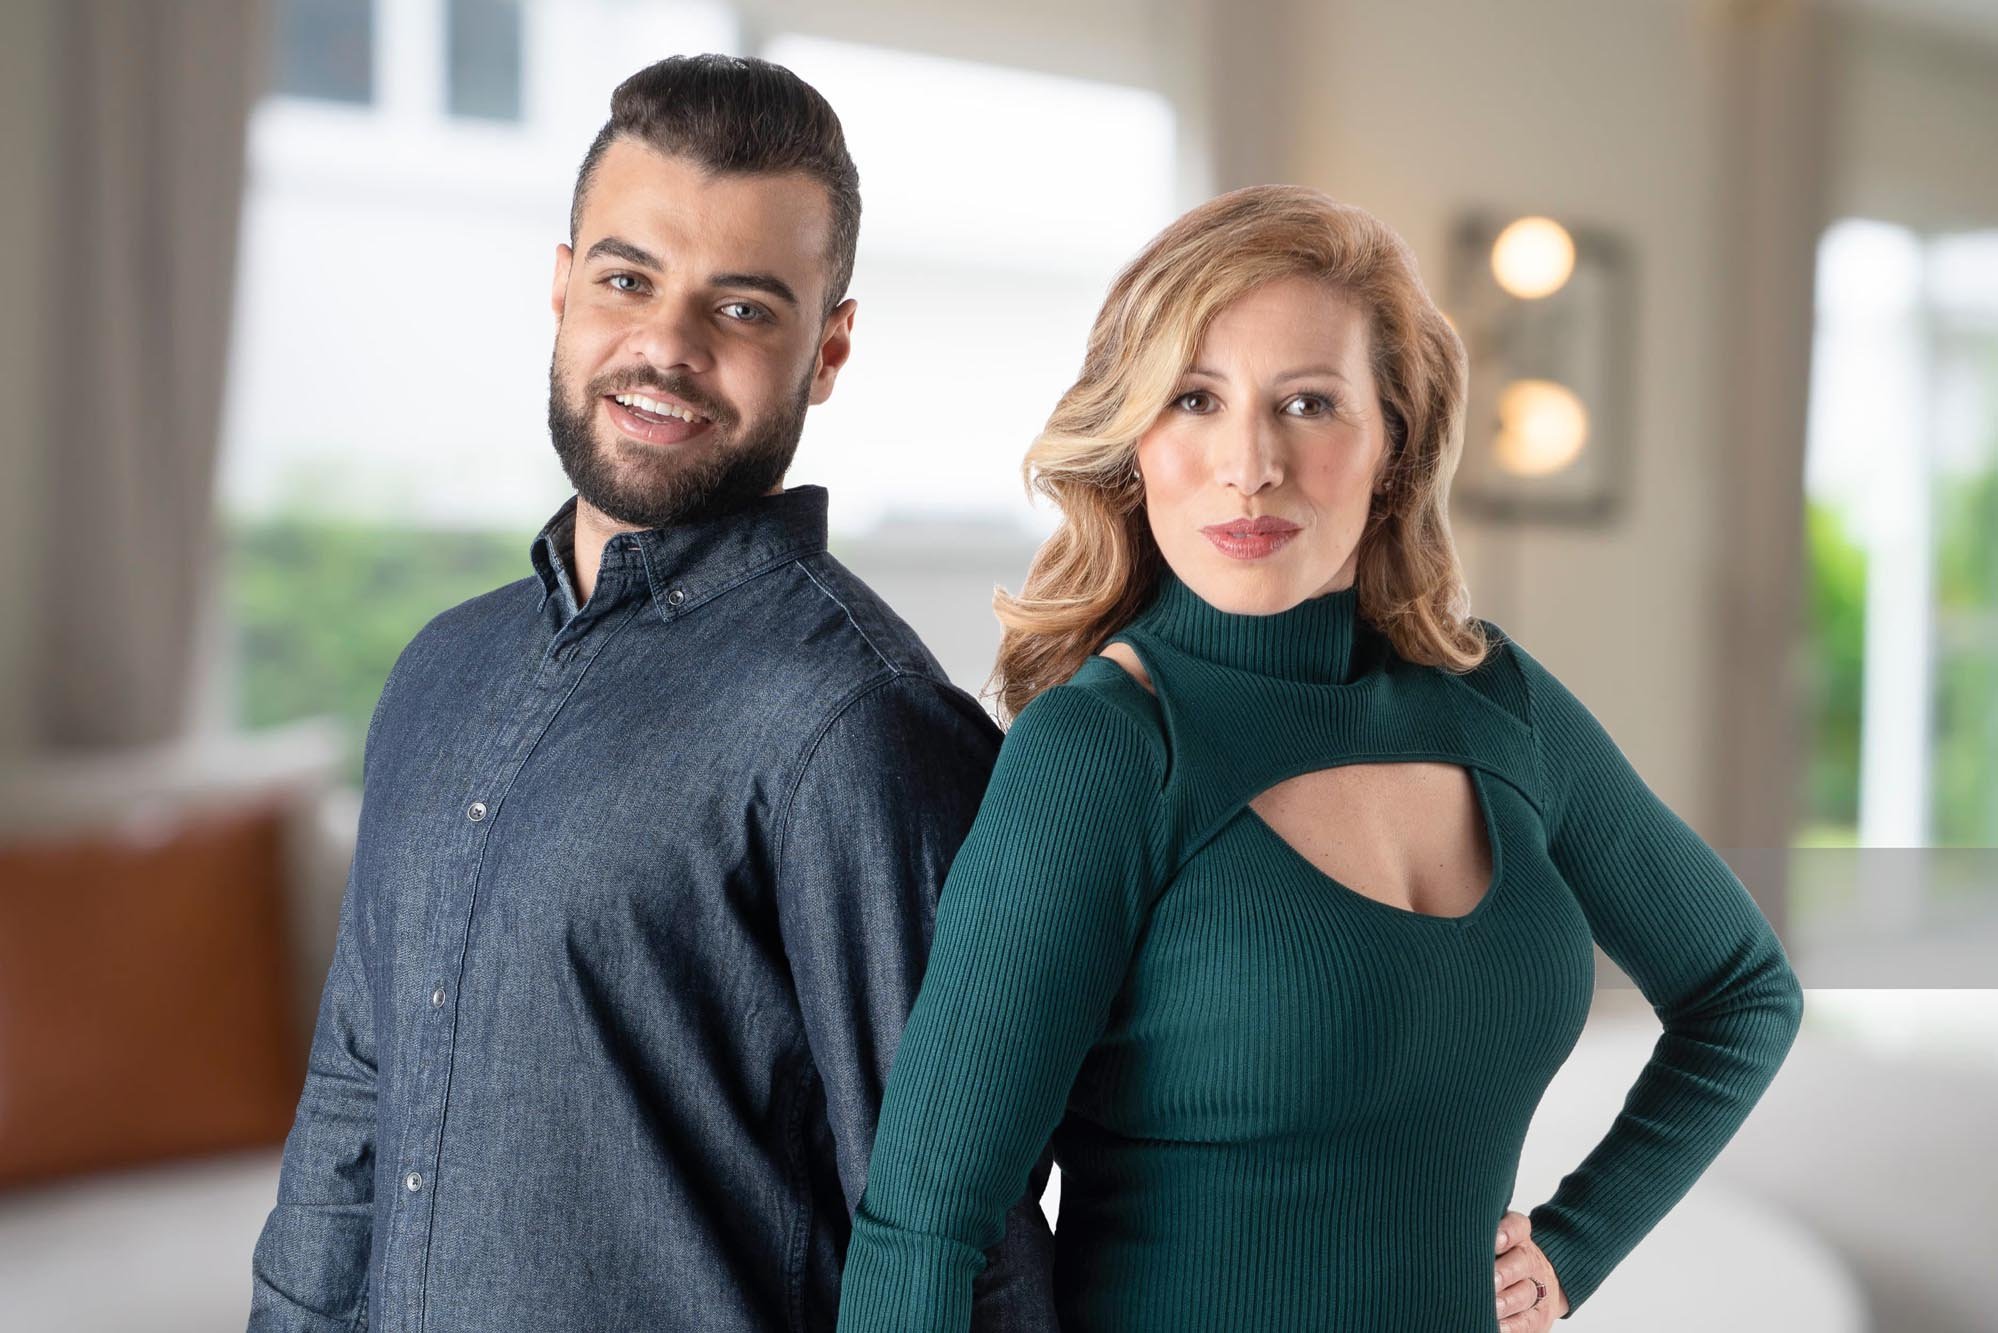 '90 Day Fiancé' Season 9 couple Mohamed and Yvette posing together for the show.